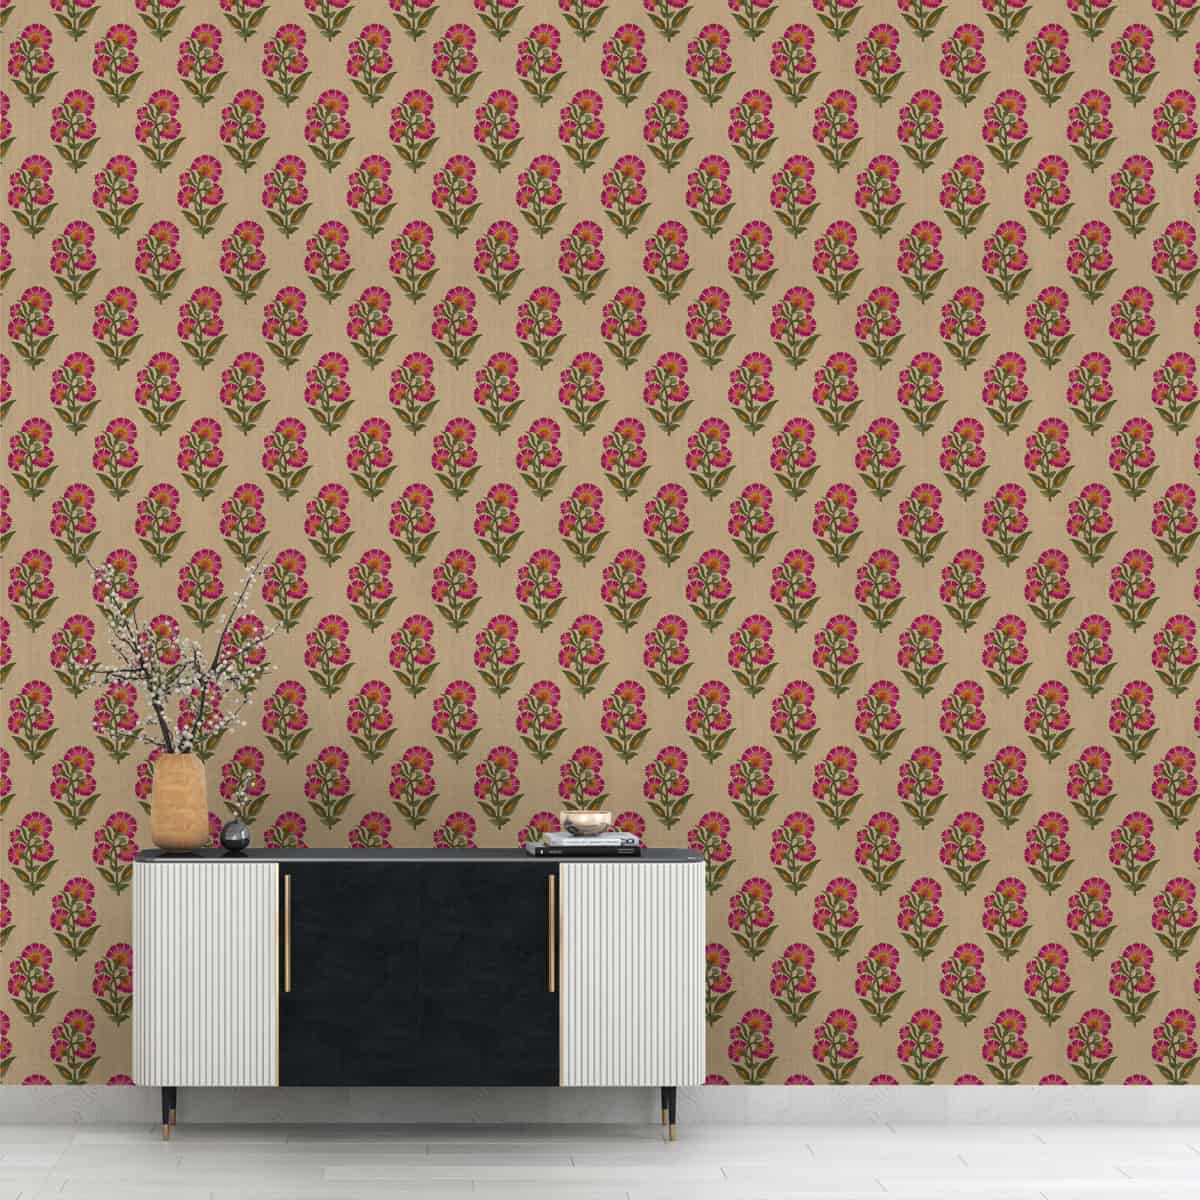 Indian Floral Theme Repeat Design Wallpaper, Luxury, Customised